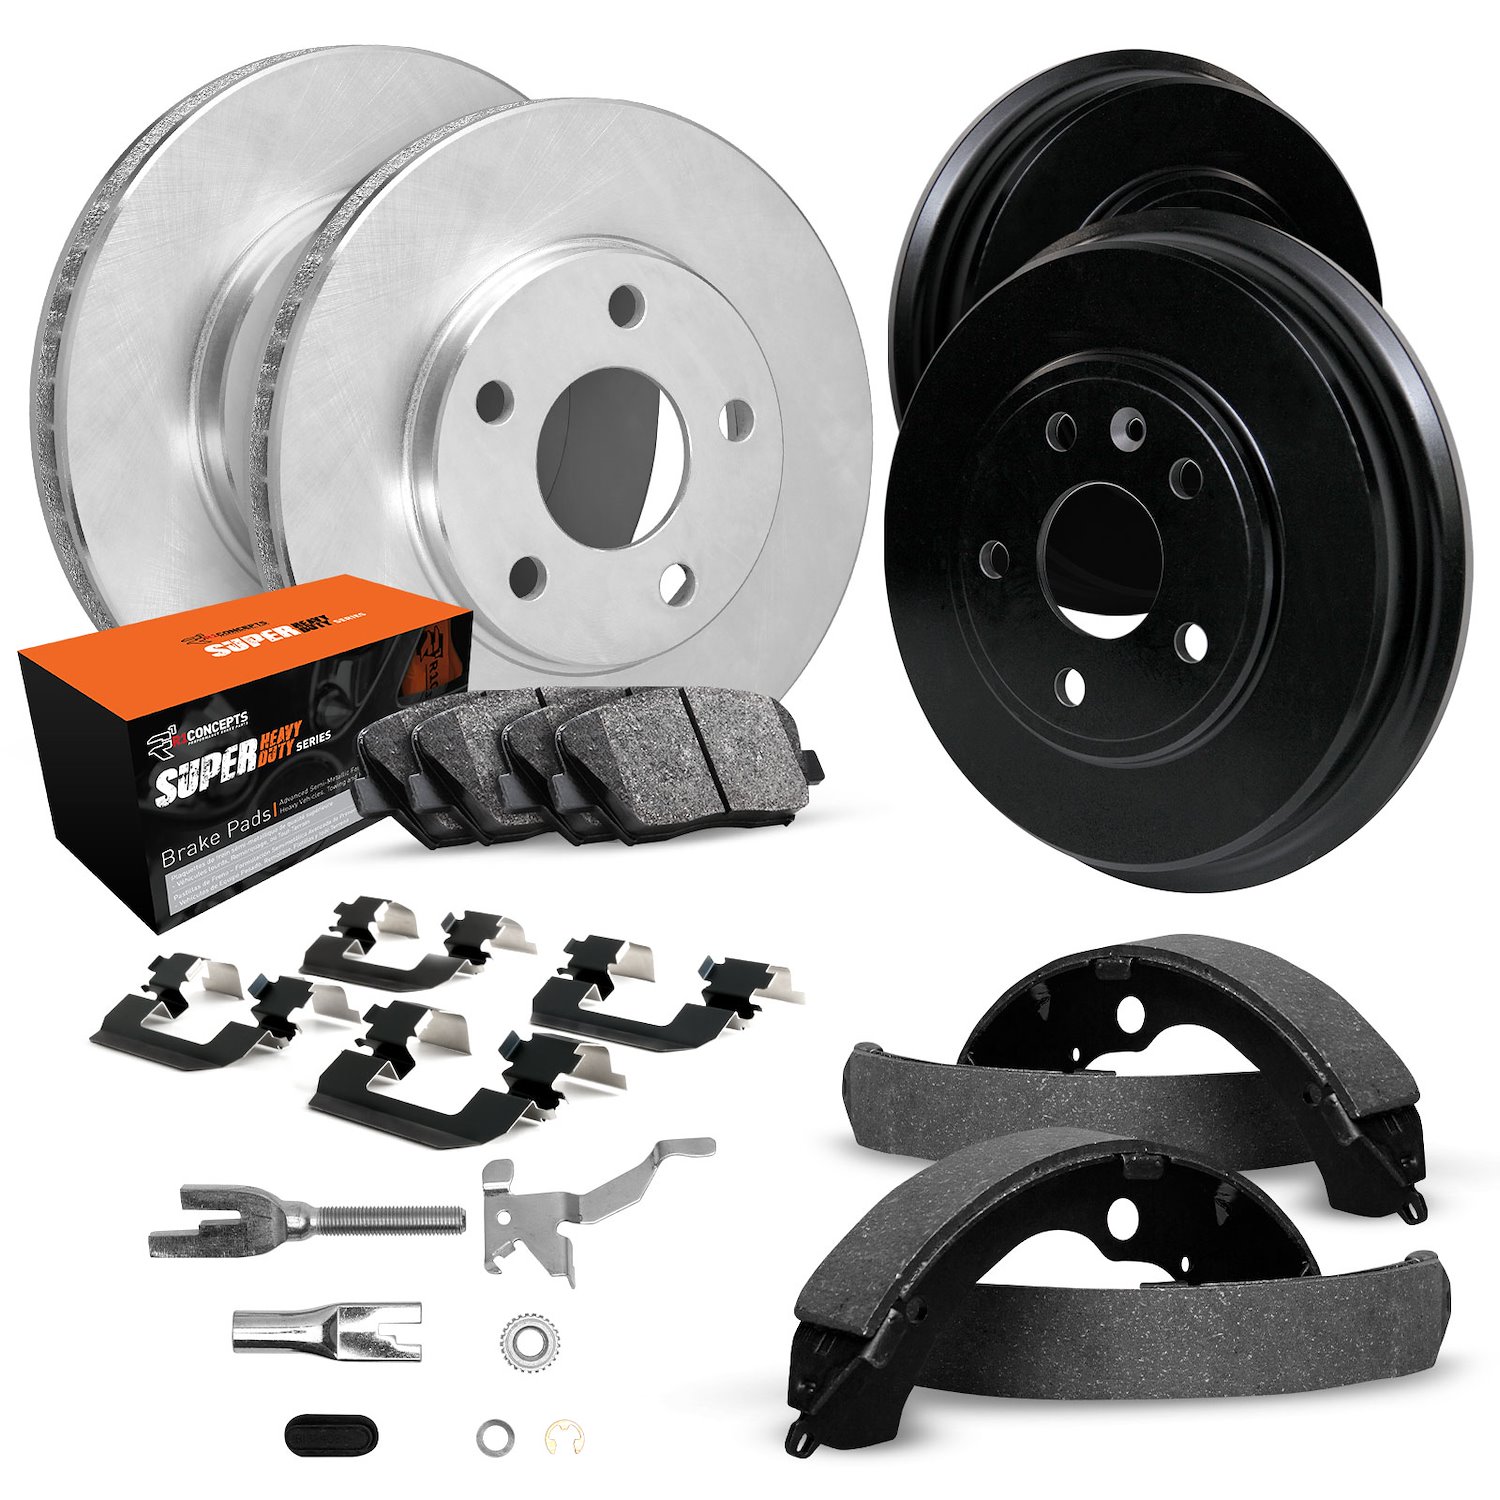 E-Line Blank Brake Rotor & Drum Set w/Super-Duty Pads, Shoes, Hardware, & Adjusters, 1993-1995 GM, Position: Front & Rear